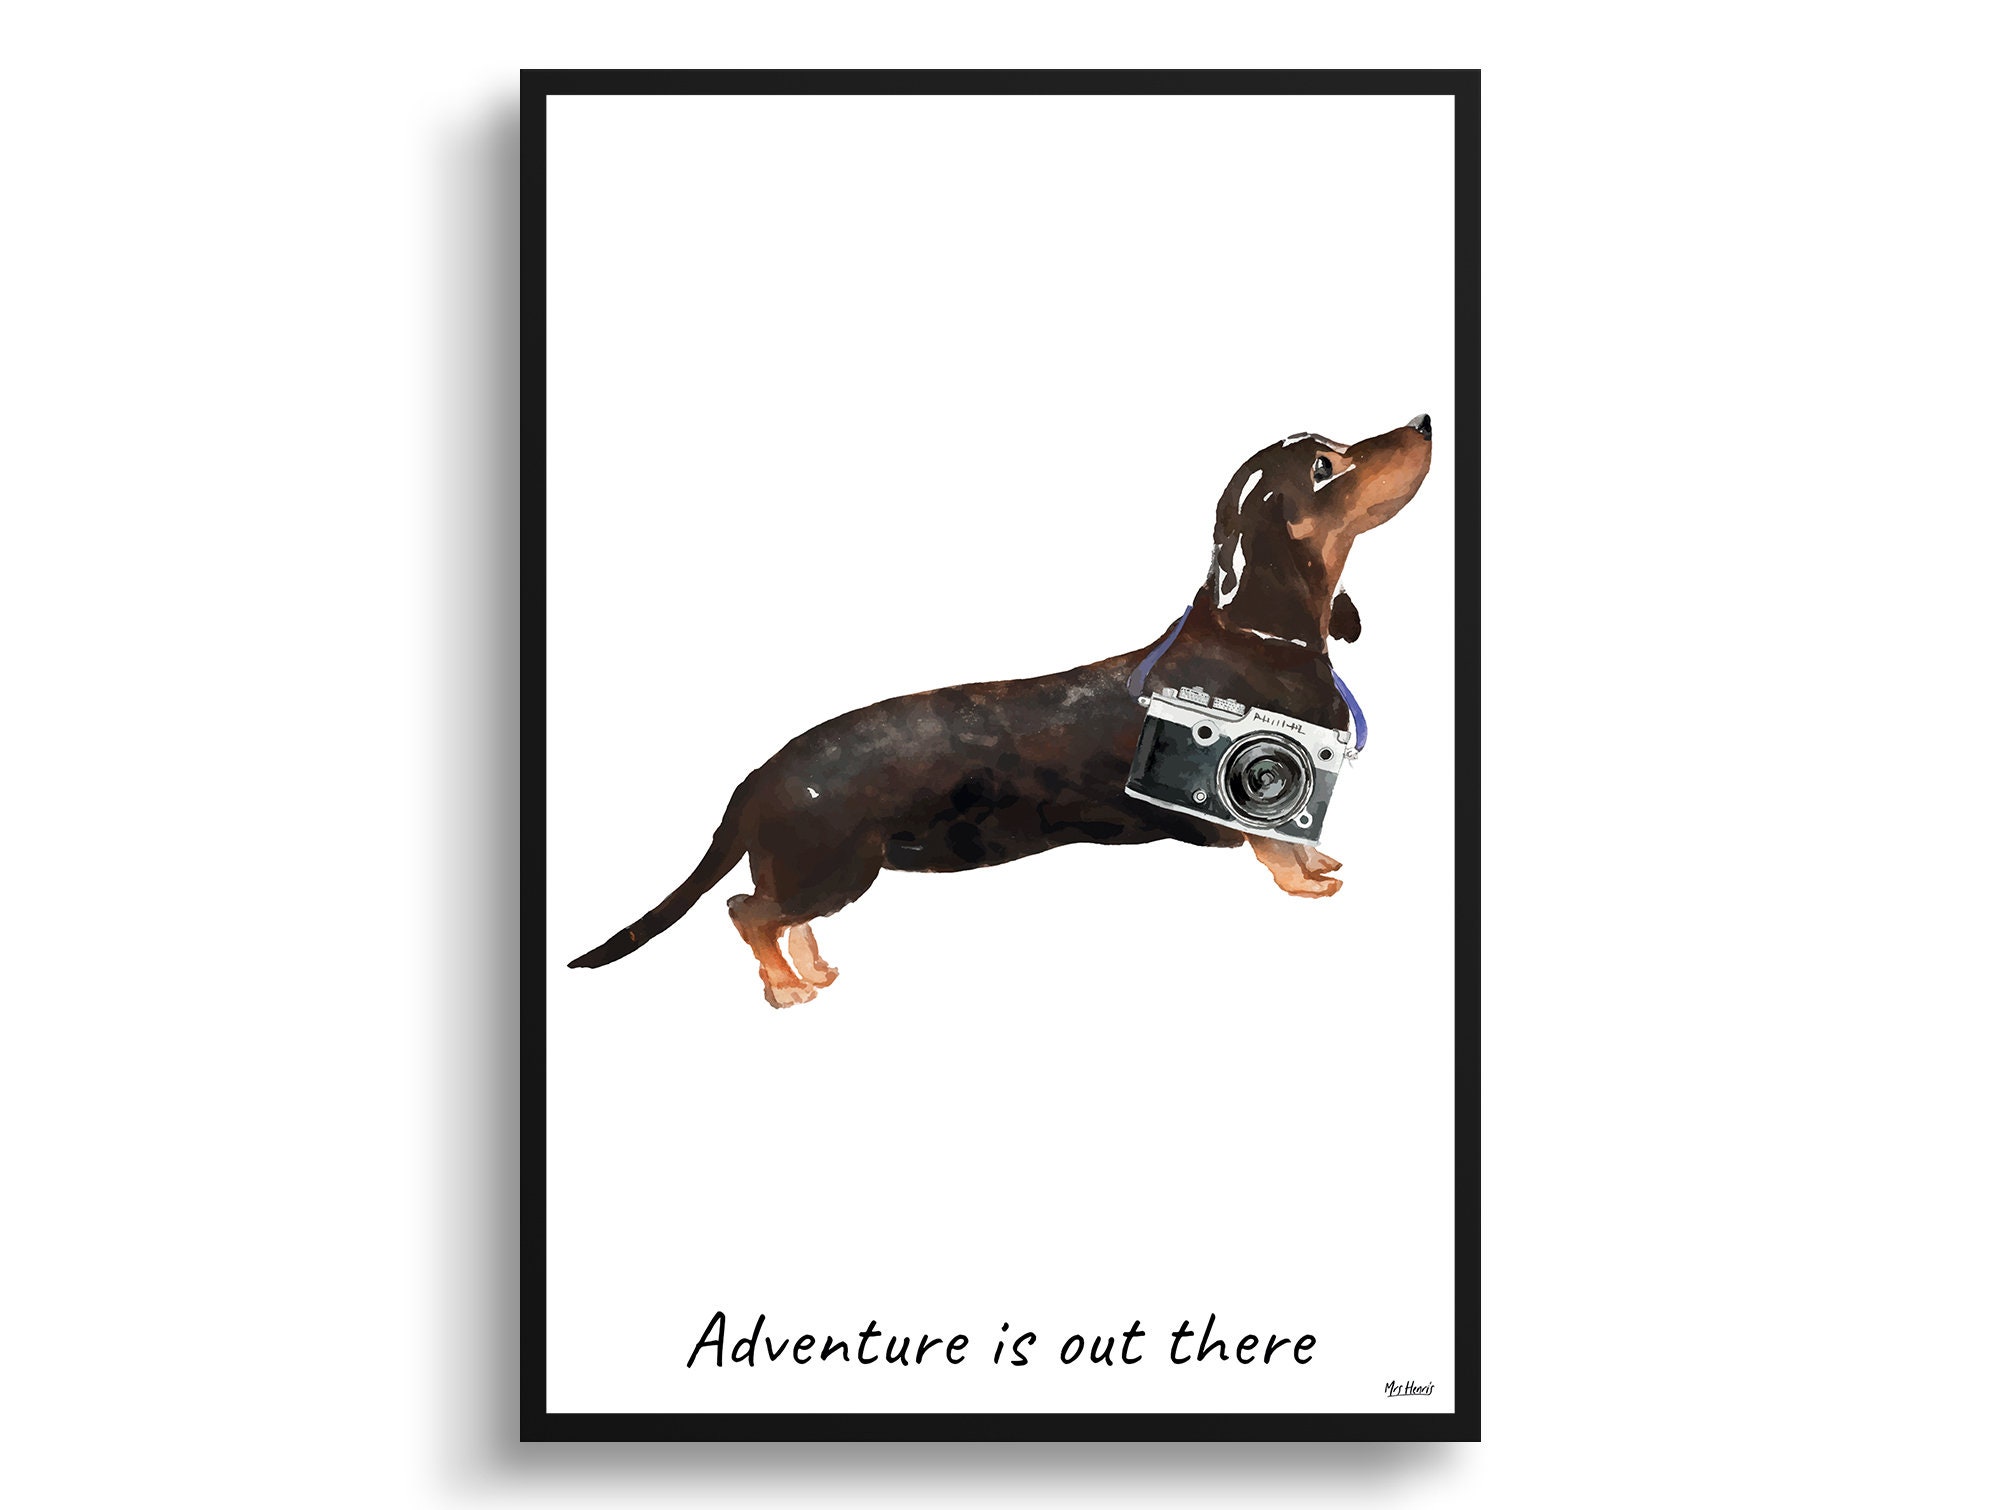 Adventure Is Out There Black Tan-Dachshund Dog Print Illustration. Framed & Un-Framed Wall Art Options. Personalised Name